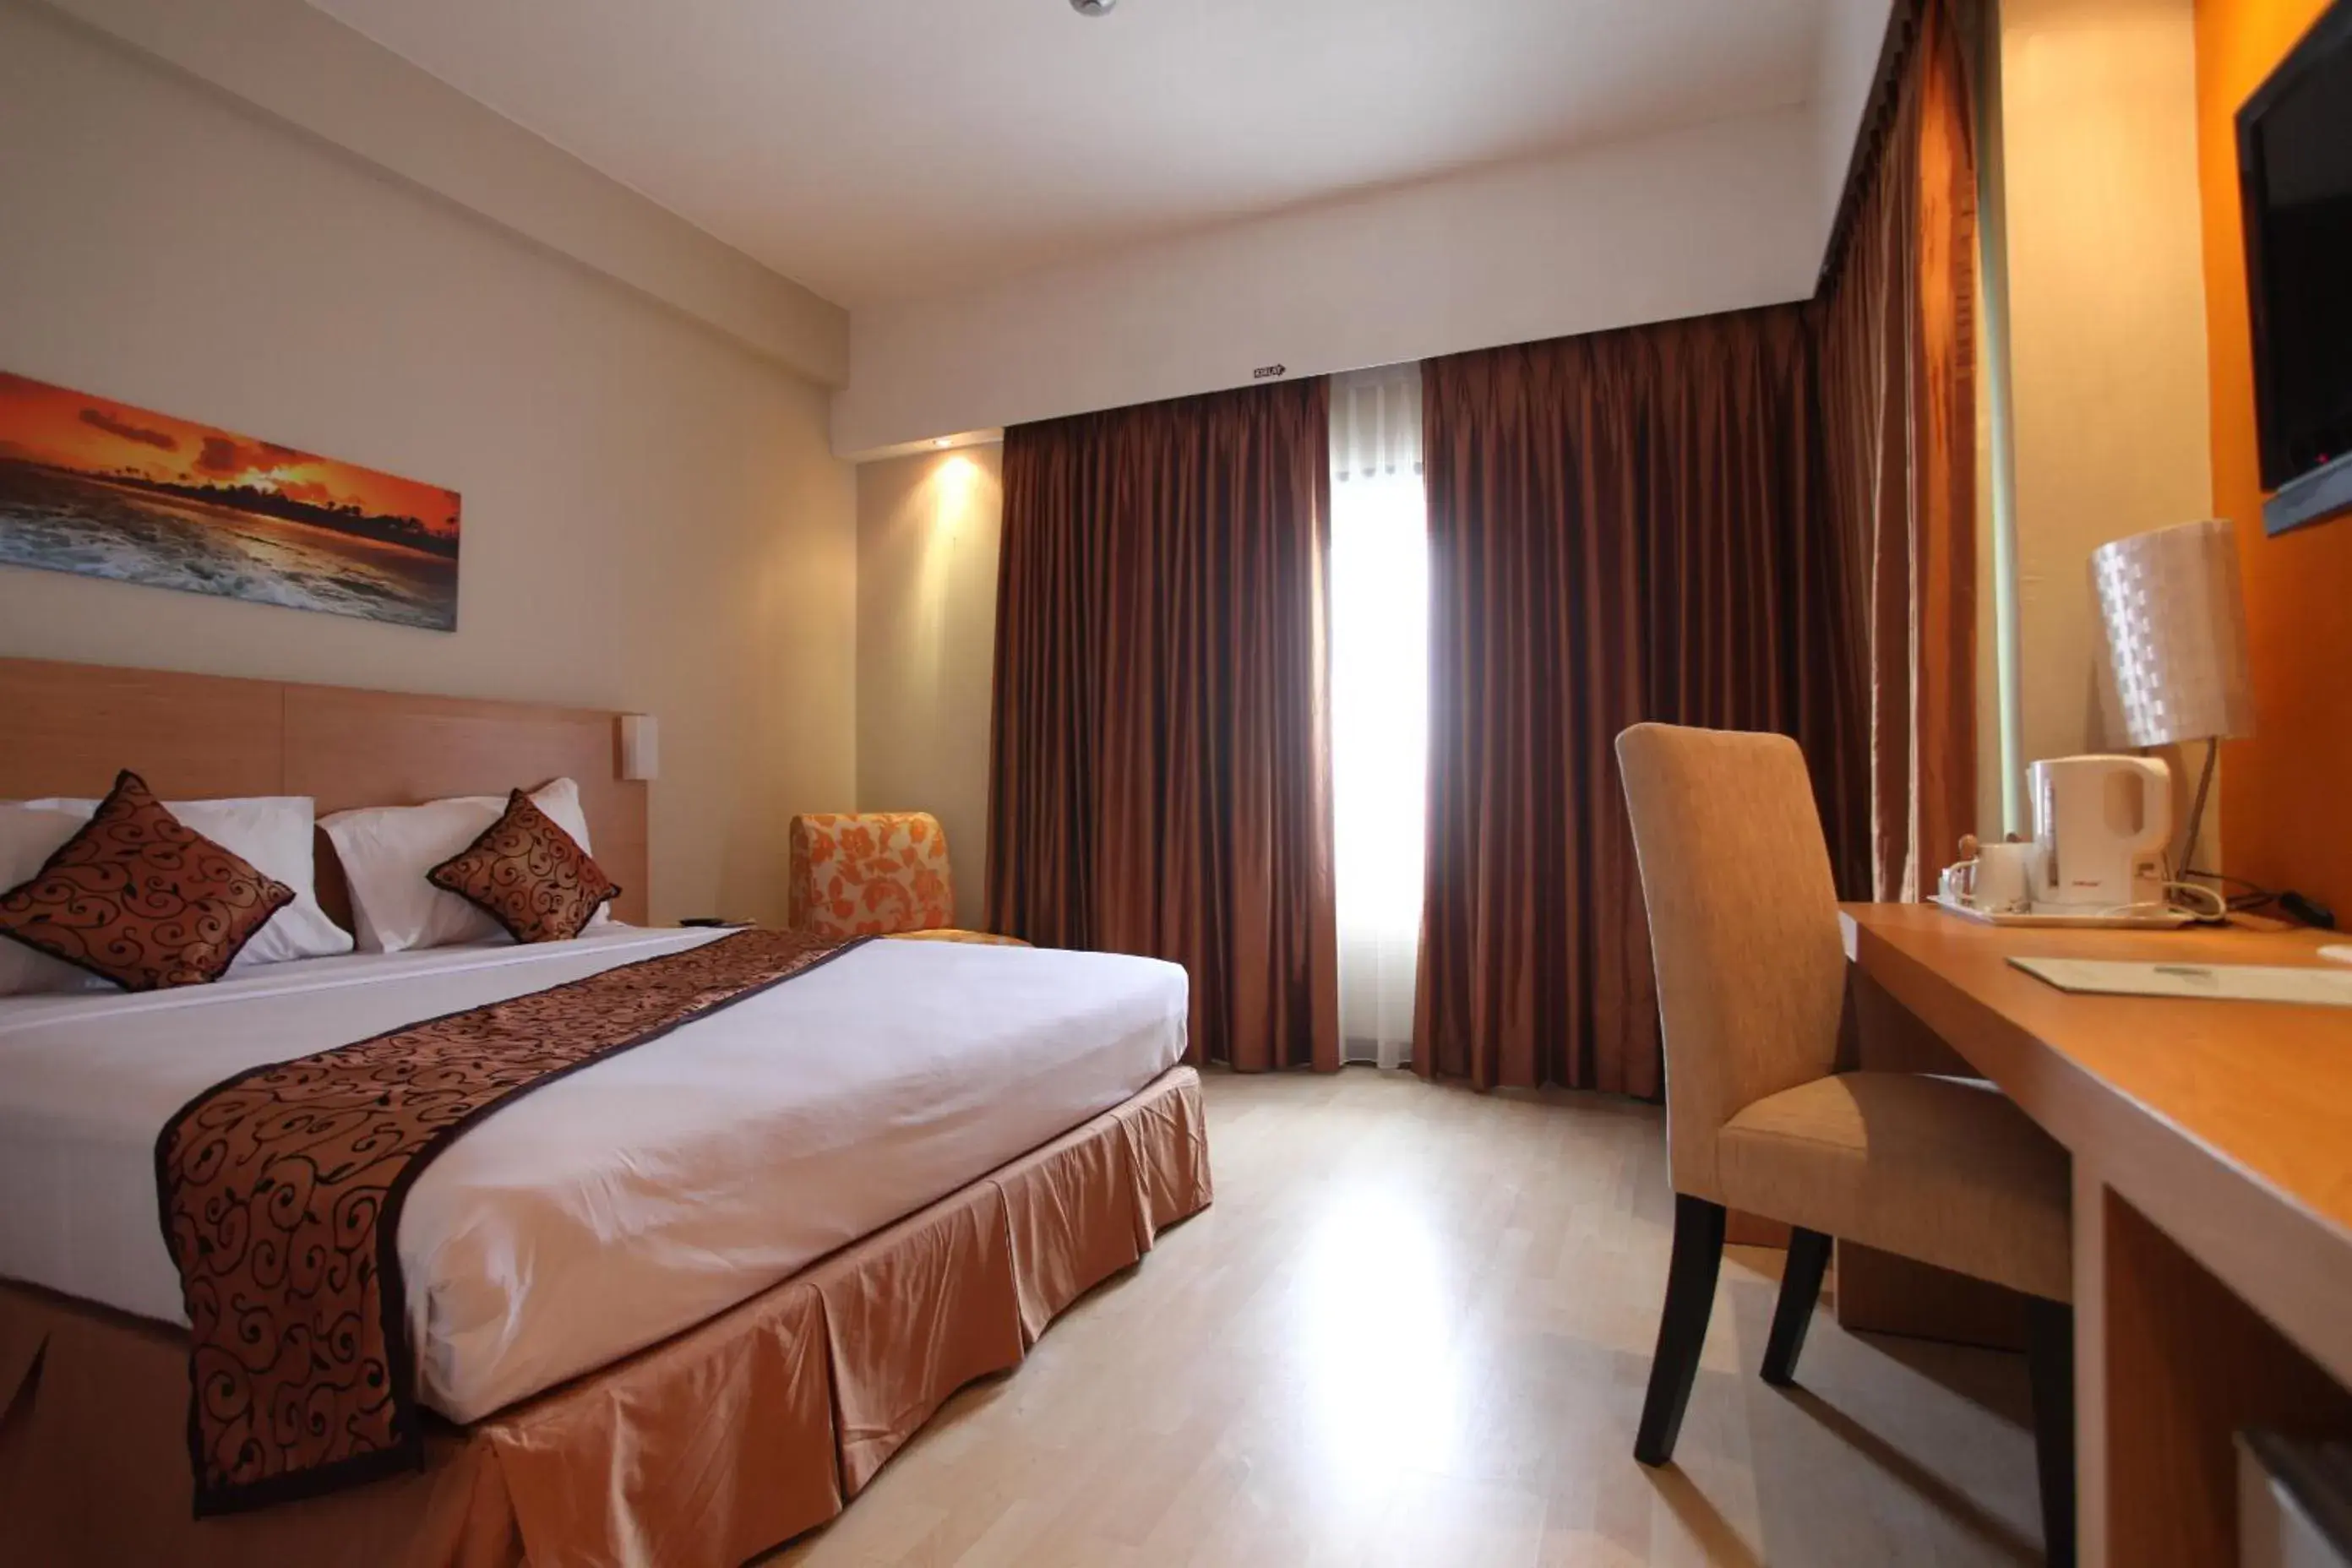 Deluxe Double Room in Lux Tychi Hotel Malang